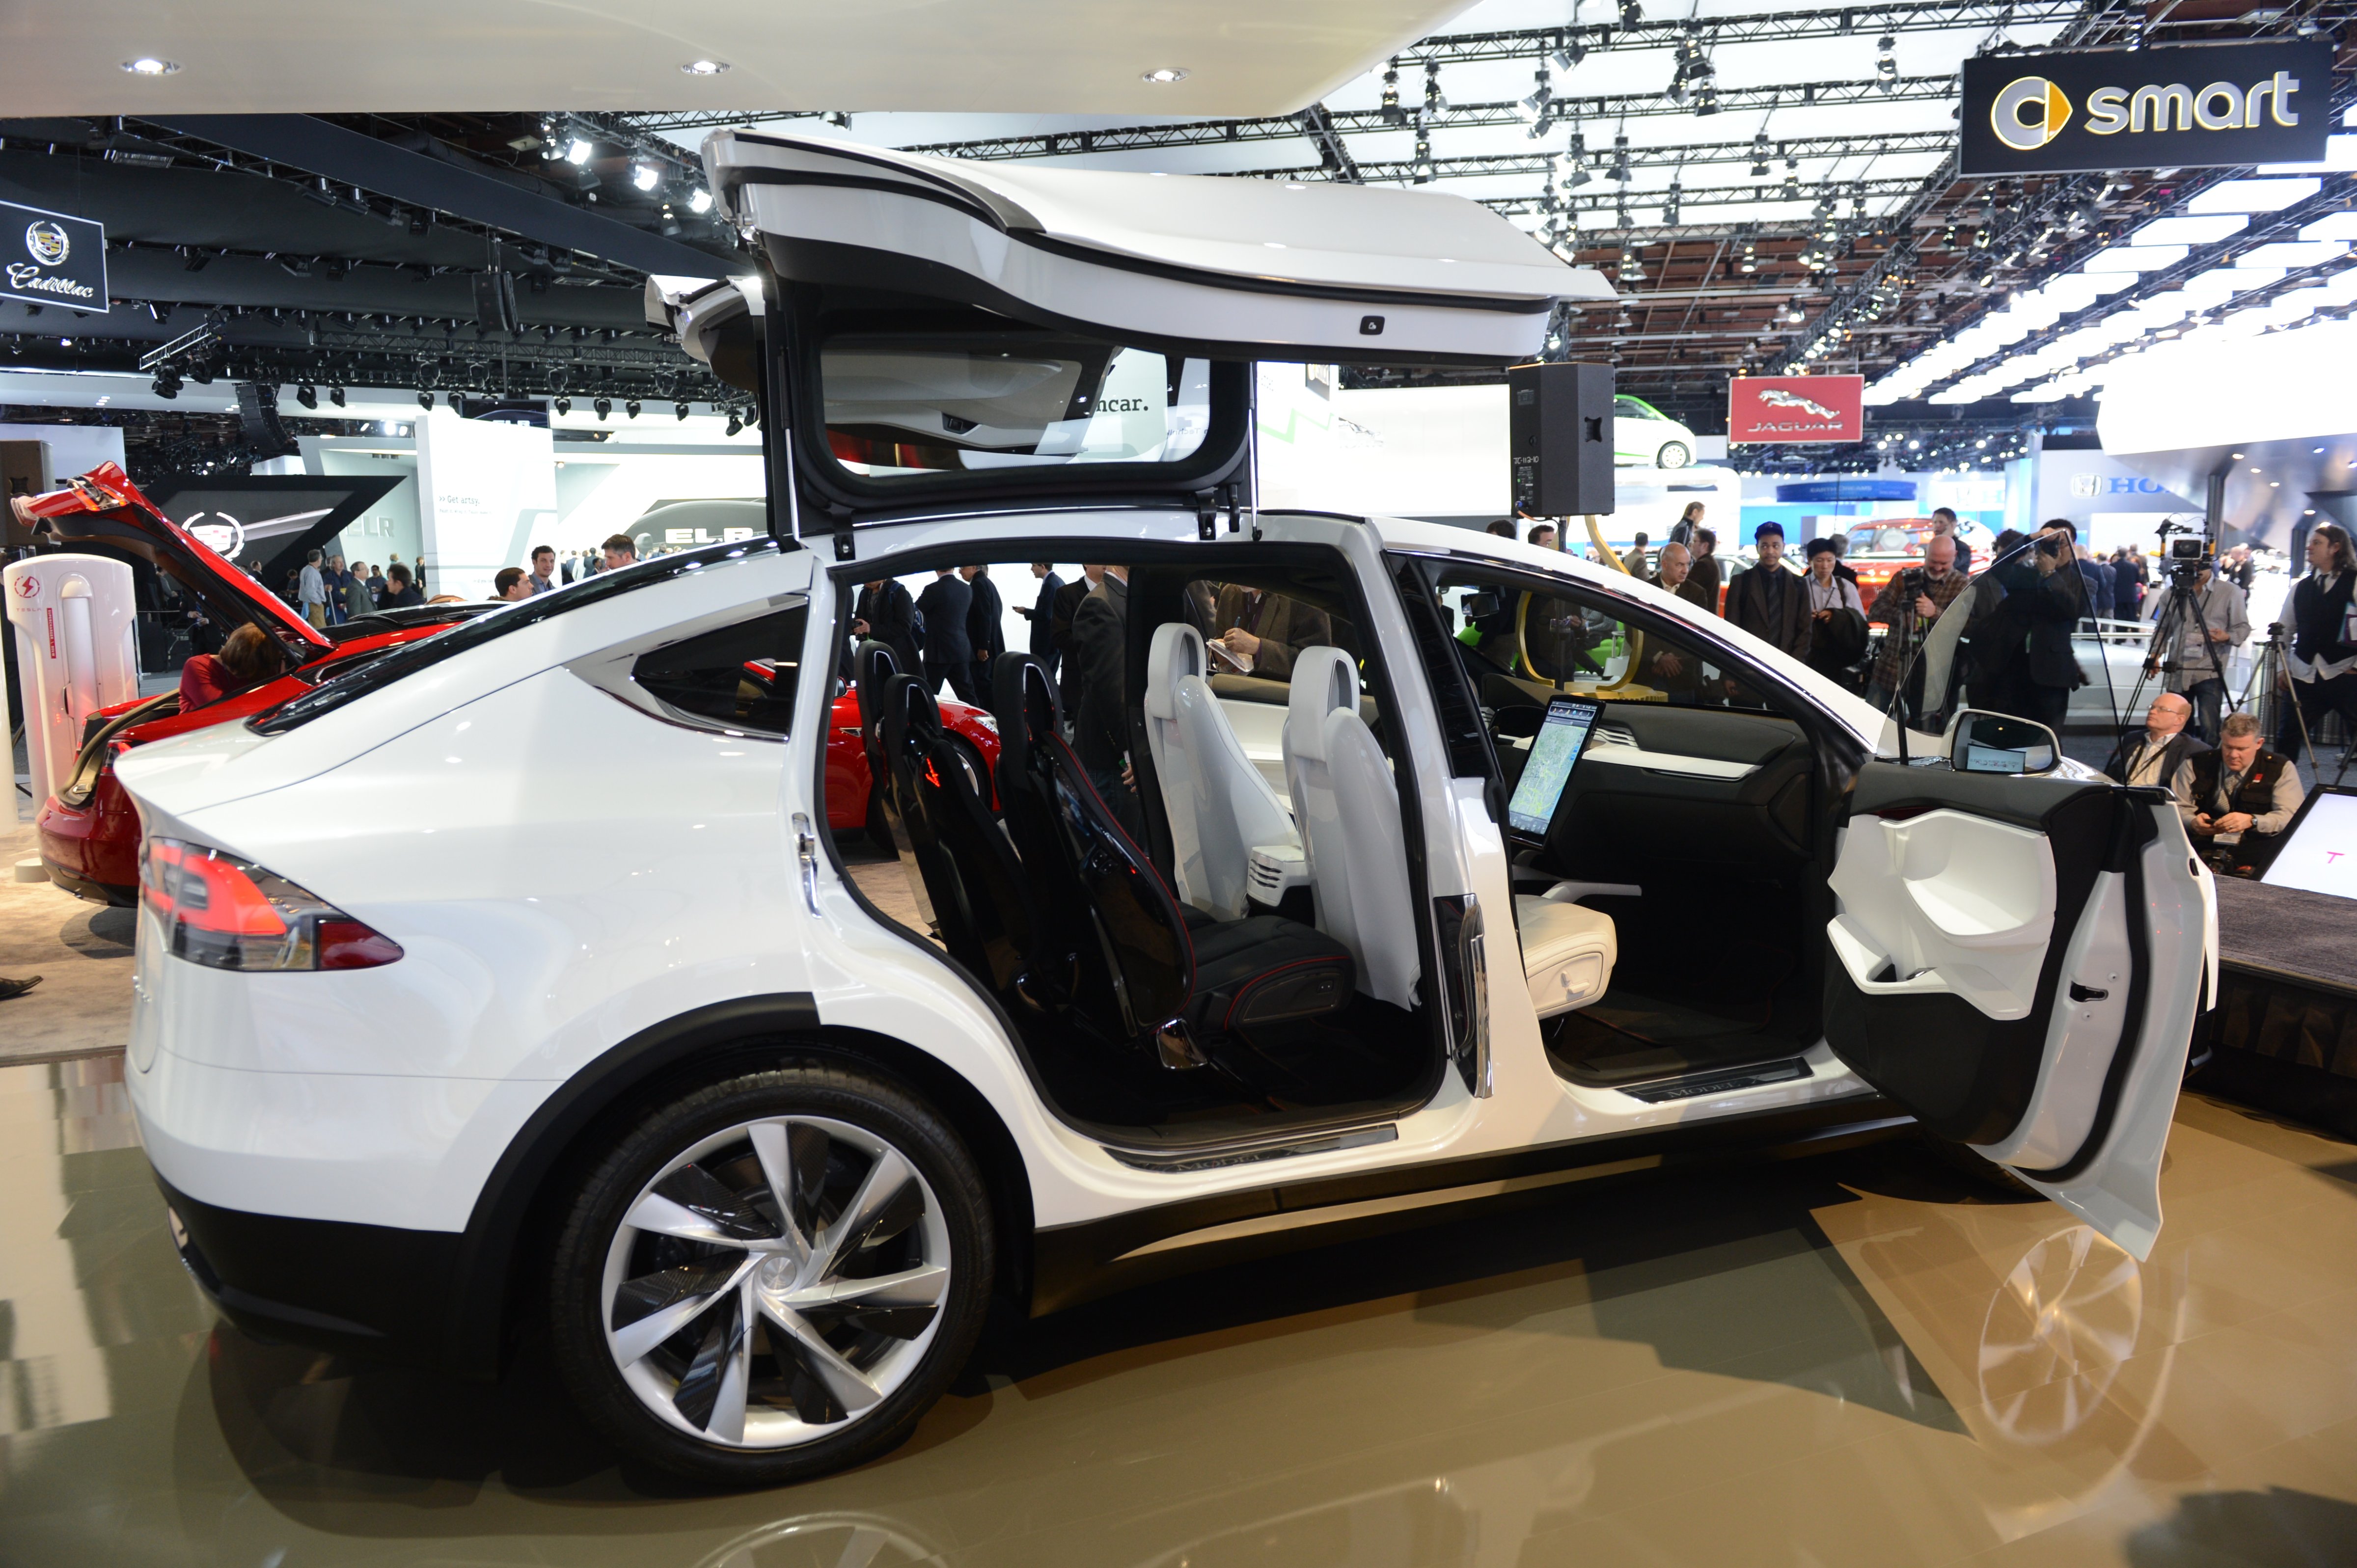 The Tesla Model X is introduced at the 2013 North American International Auto Show . (STAN HONDA&mdash;AFP/Getty Images)